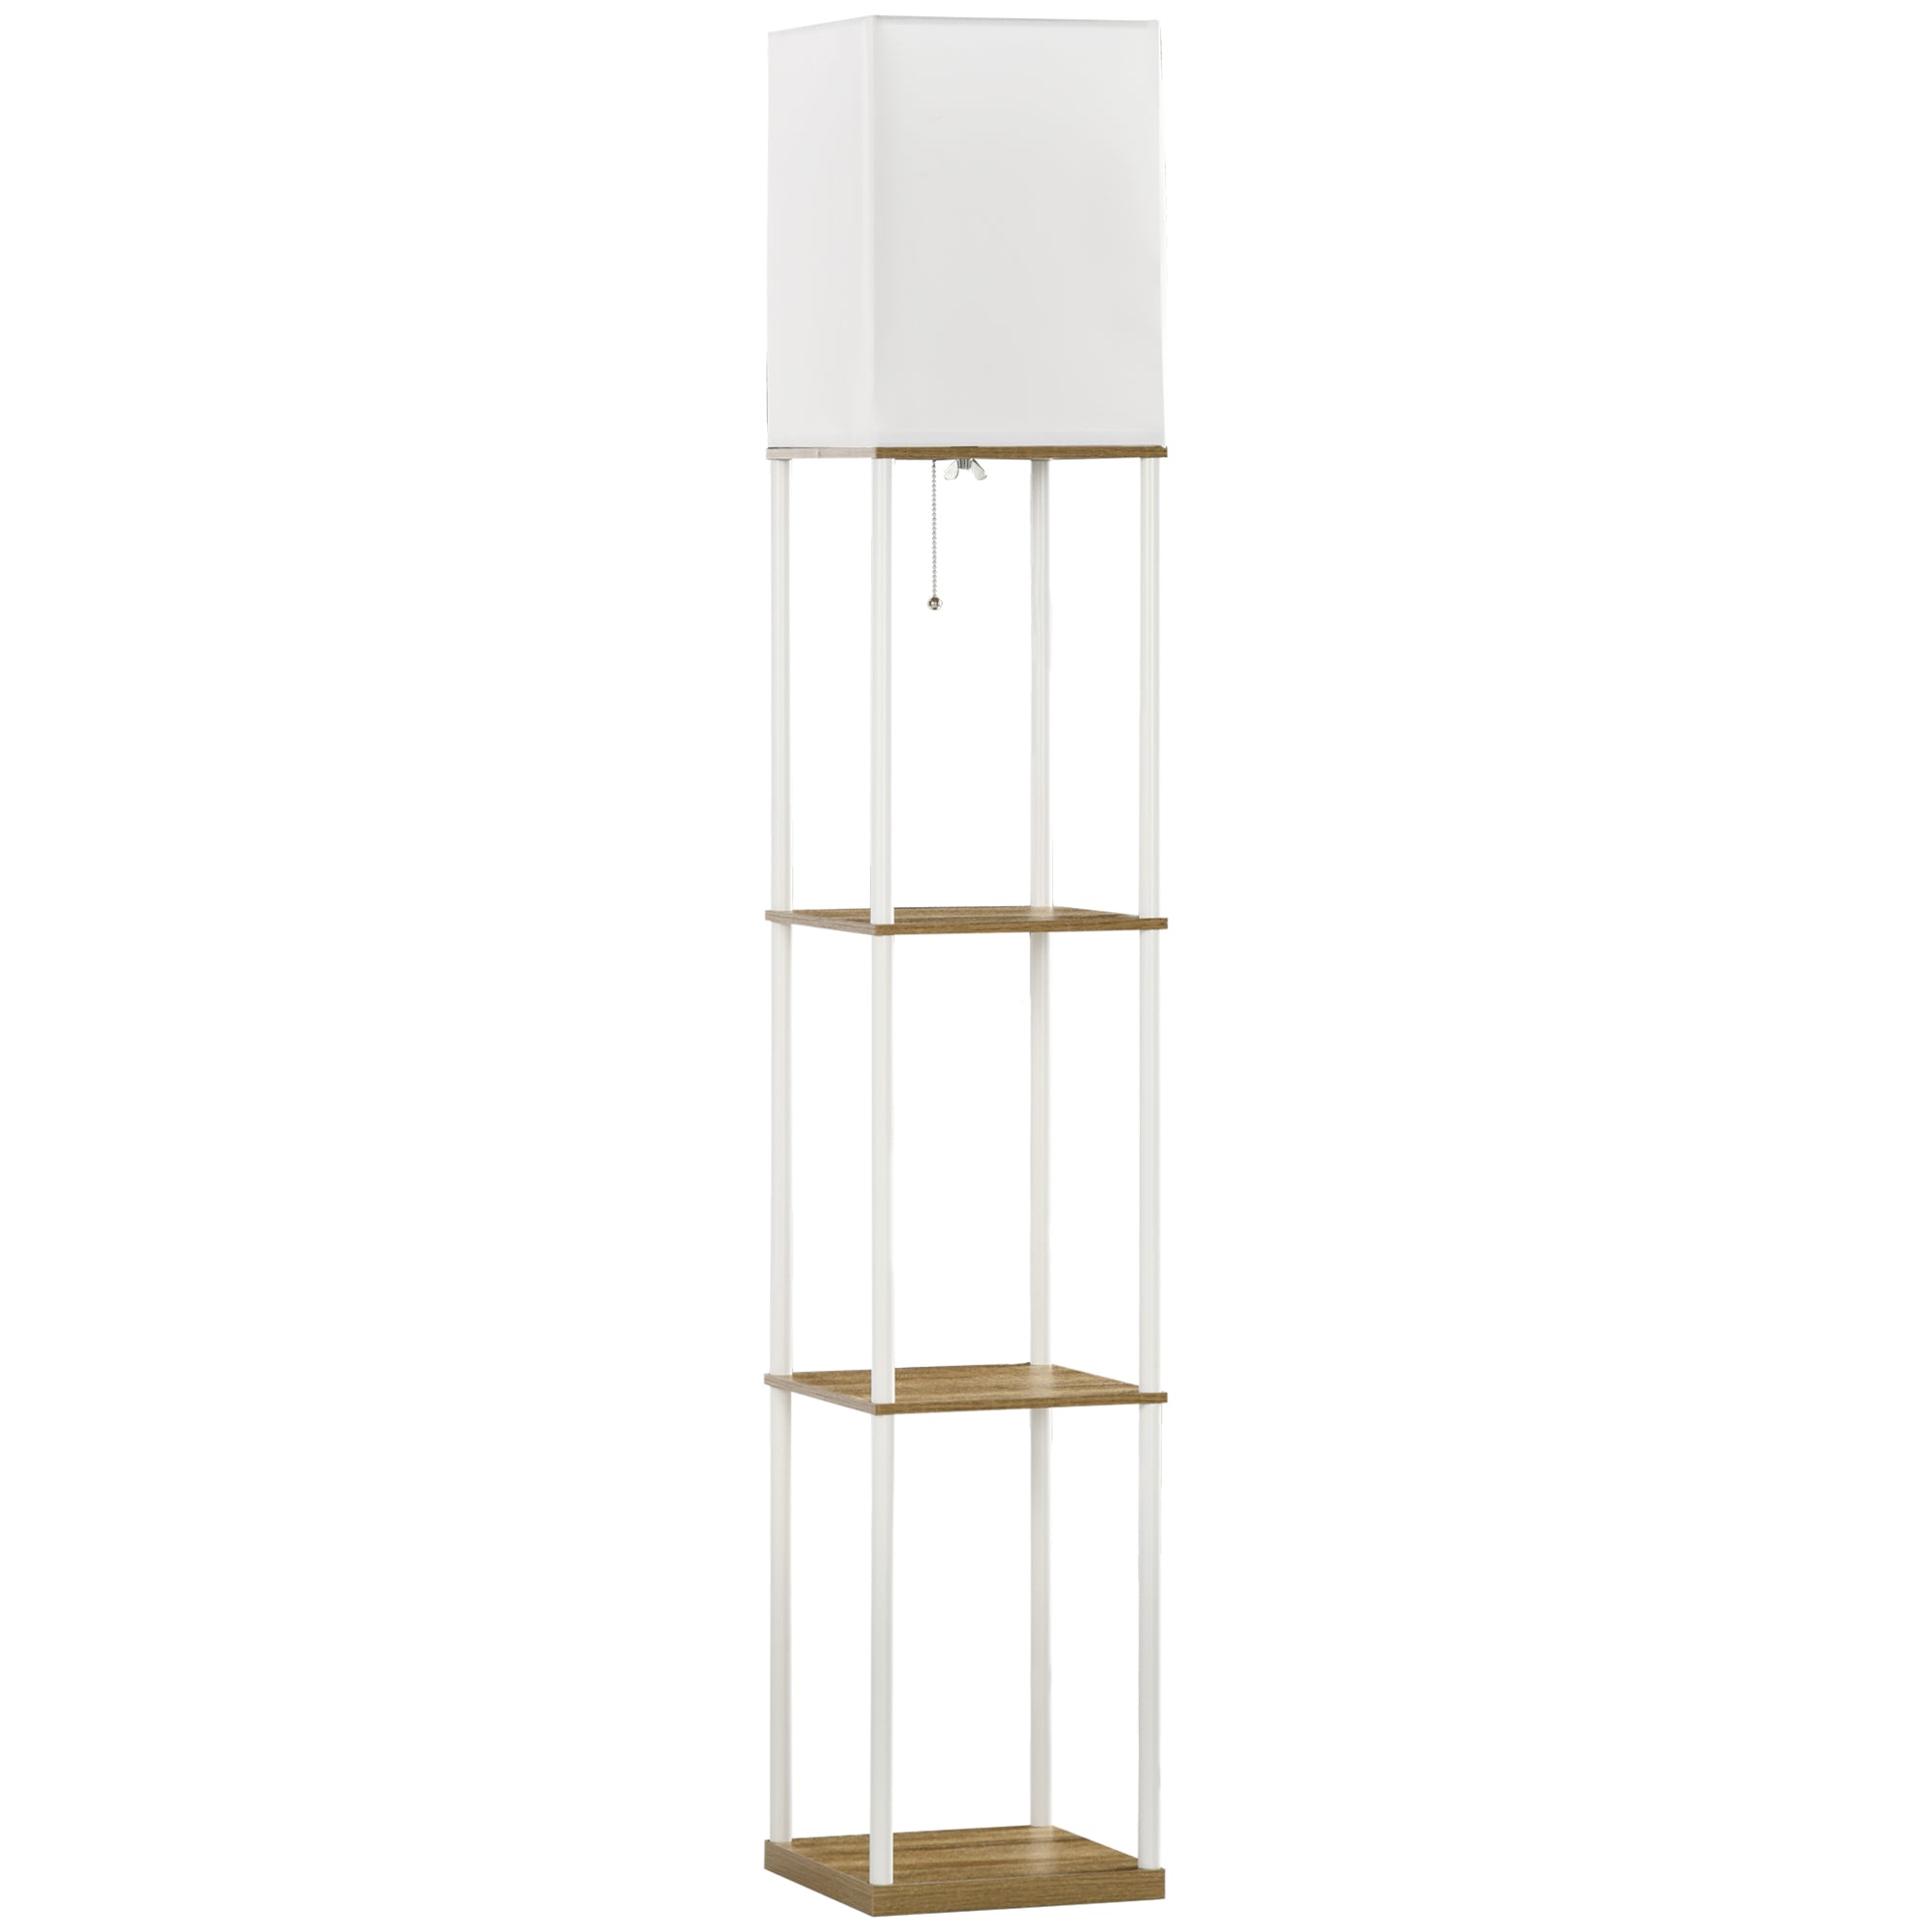 Modern Floor Lamp with Shelves, 3 Layer Shelf Tall Standing Lamp with Fabric Lampshade, Pull Chain Switch (Bulb not included)  AOSOM   